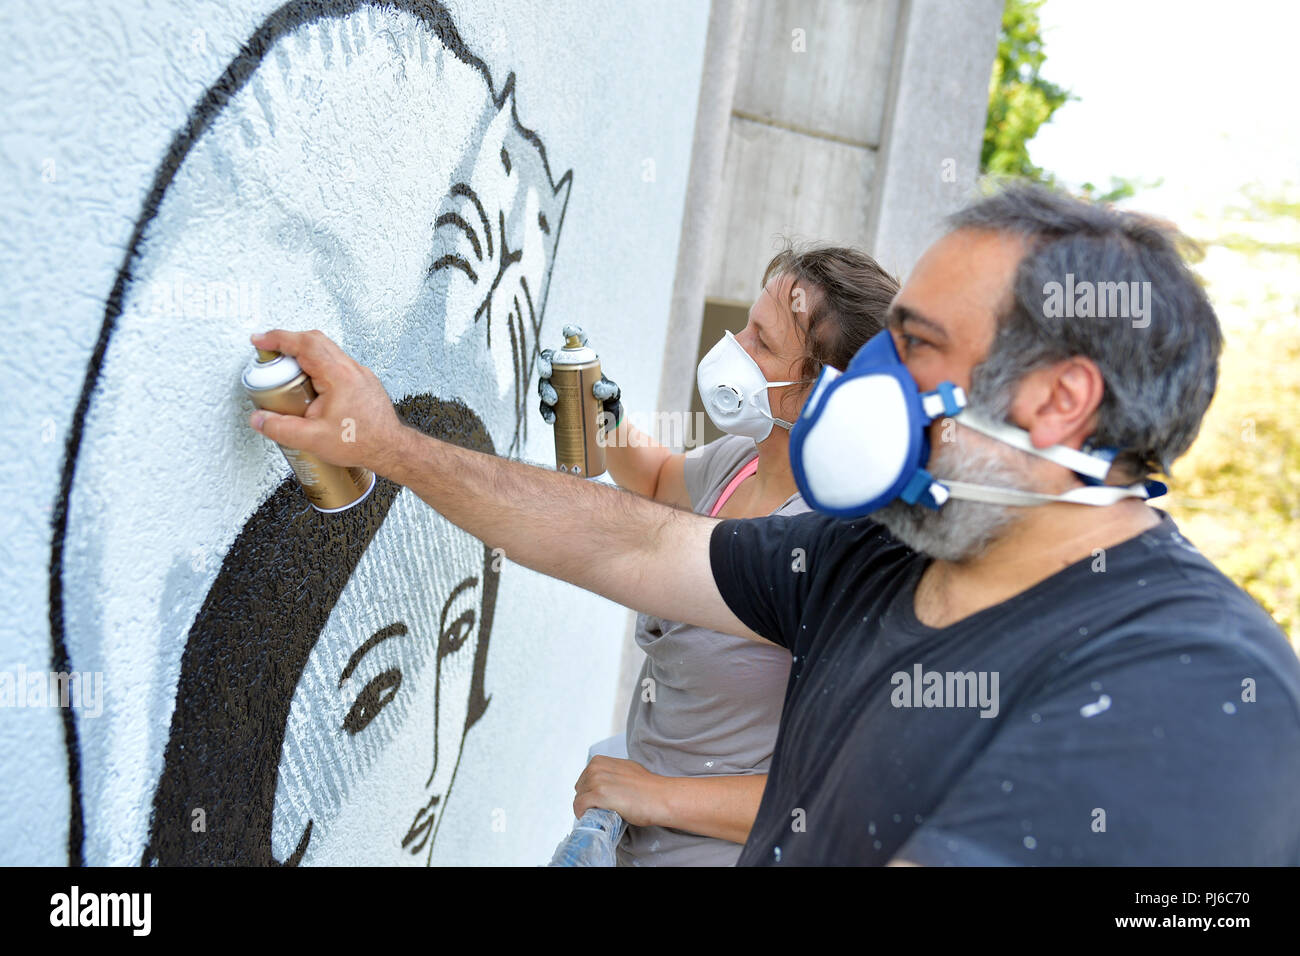 Mannheim, Germany. 23rd Aug, 2018. 23.08.2018, Baden-Württemberg, Mannheim: Christina Laube (l) and Mehrdad Zaeri from the artist duo 'Sourati' spray a mural entitled 'Abschied und Neubeginn' (lit. Farewell and New Beginning) on a house wall. At the end of the year, 18 huge works of art will be displayed on the facades of the North Baden city. Credit: Uwe Anspach/dpa/Alamy Live News Stock Photo